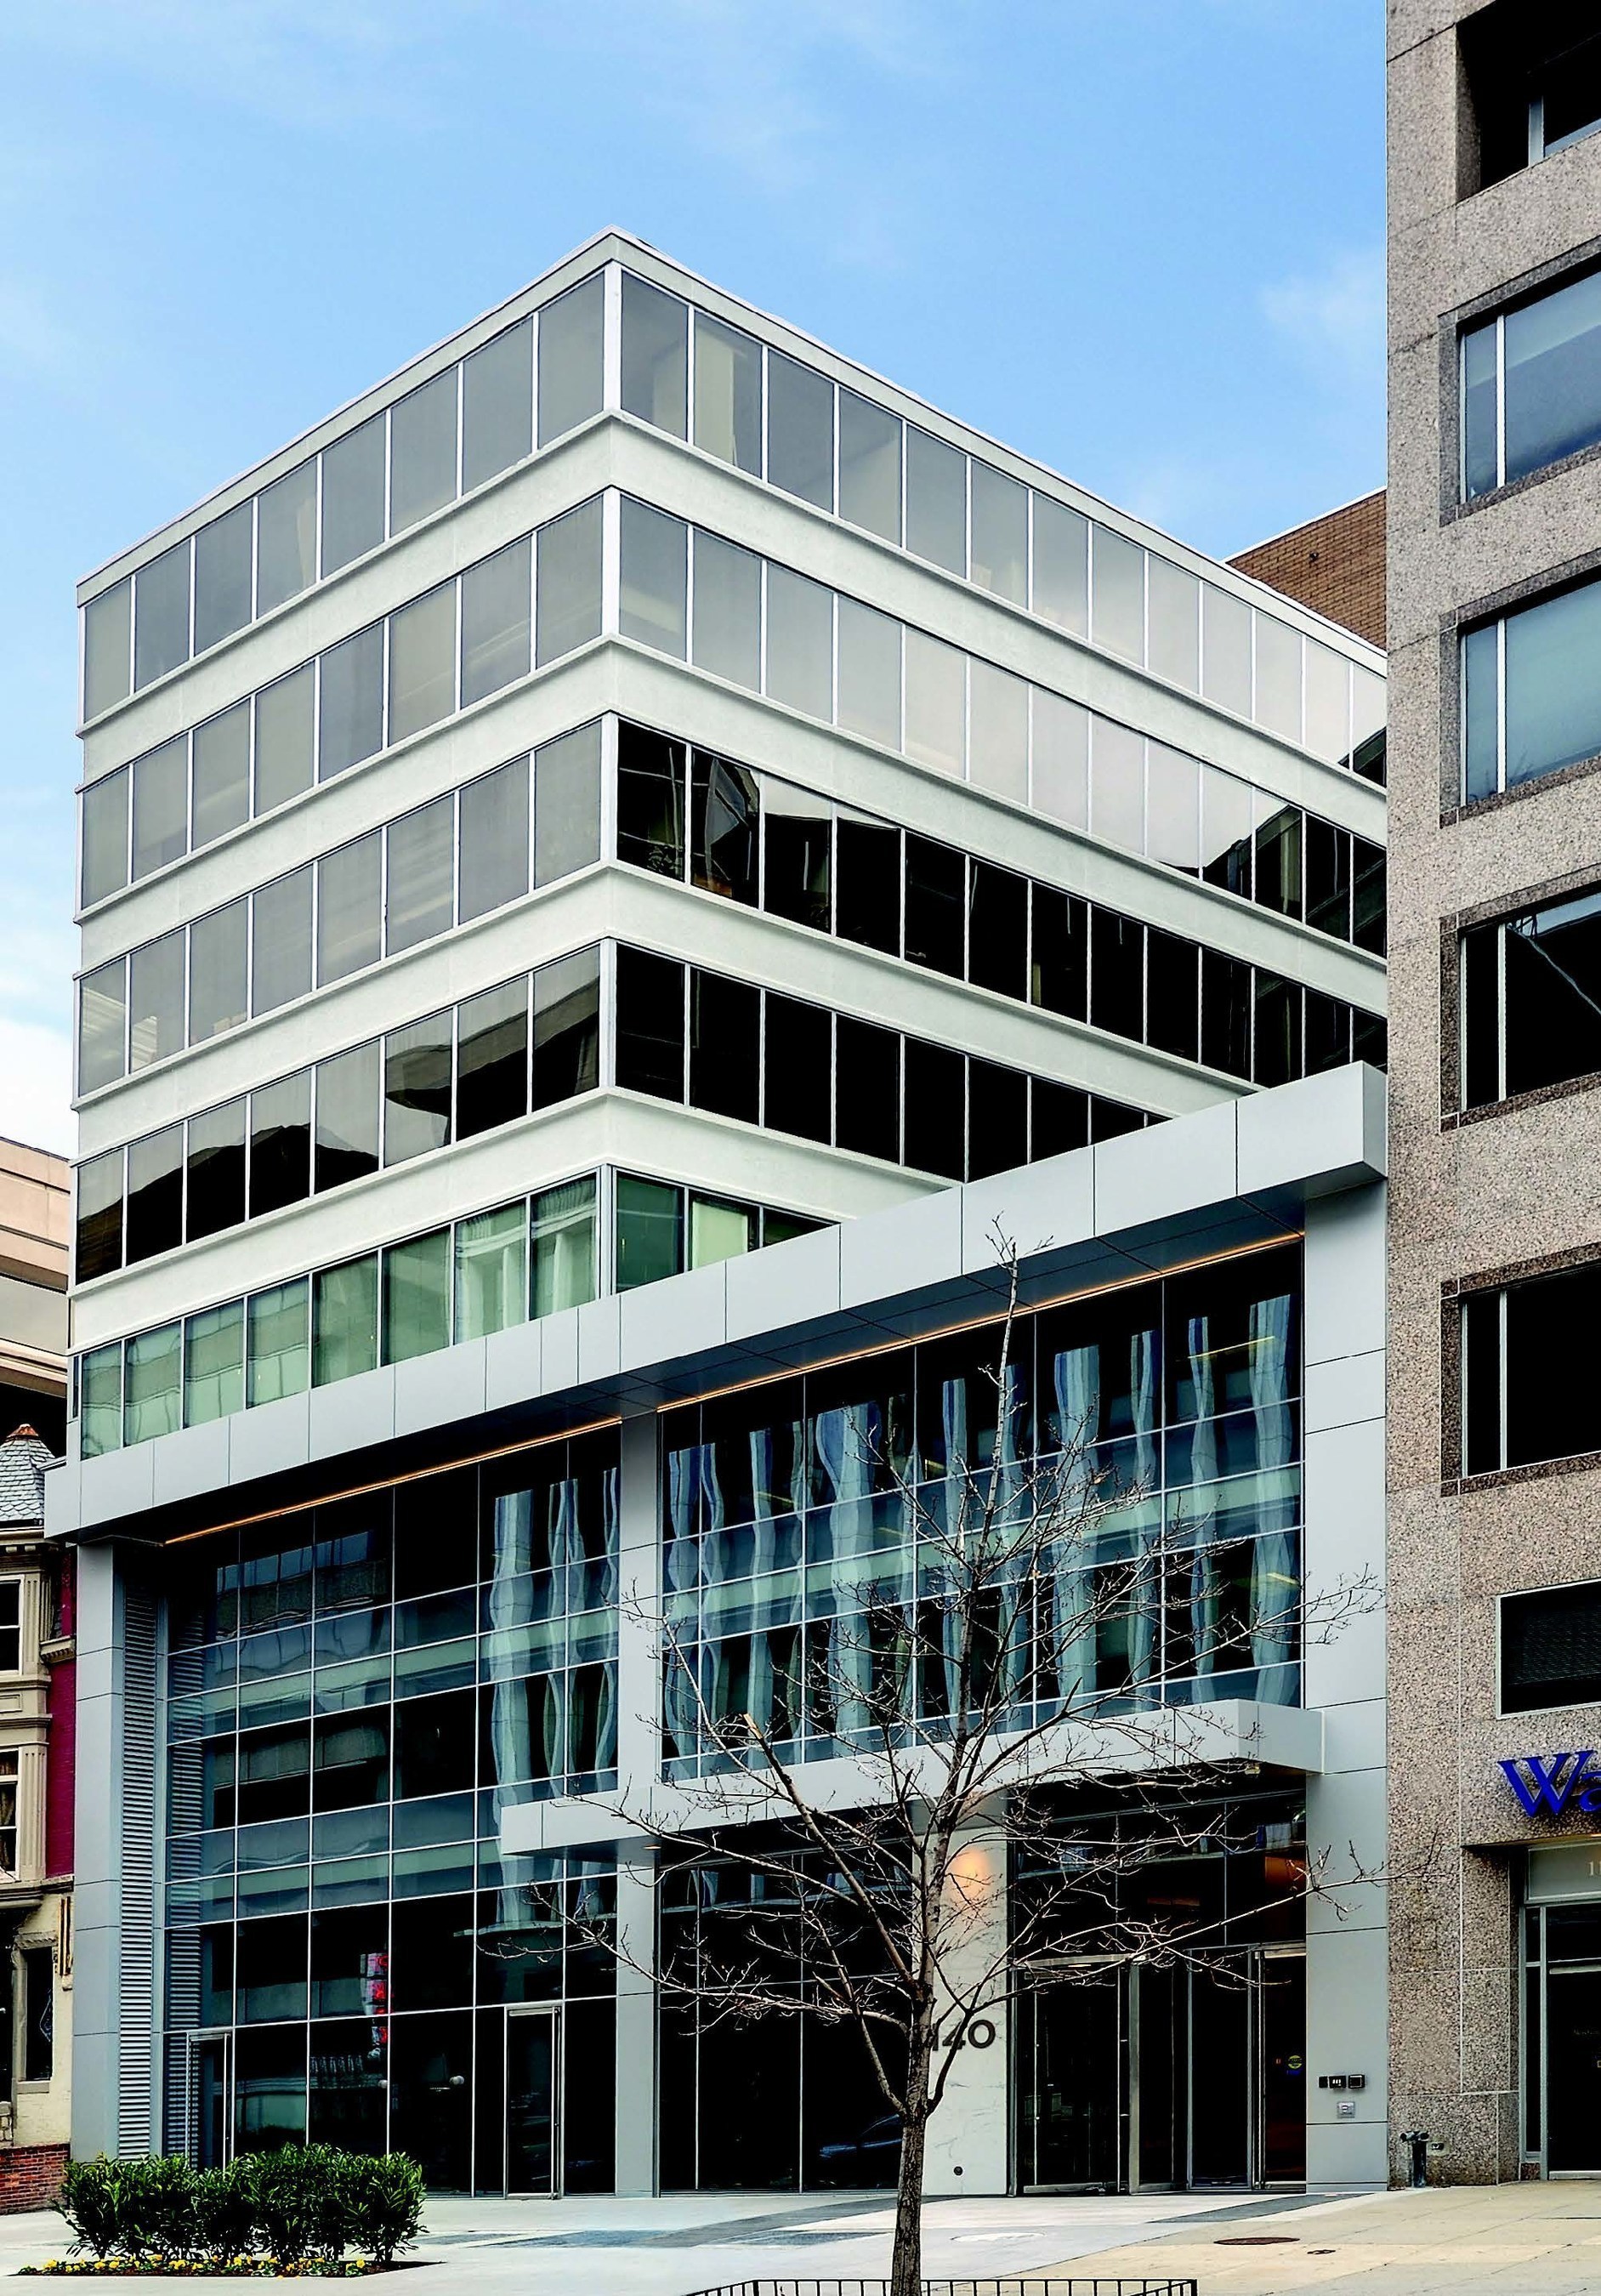 American Real Estate Partners with joint venture partner The Davis Companies announced the $40.5 million sale of 1140 19th Street, a 72,648 square foot, nine-story Class A office building in the heart of Washington, DC's Golden Triangle district.